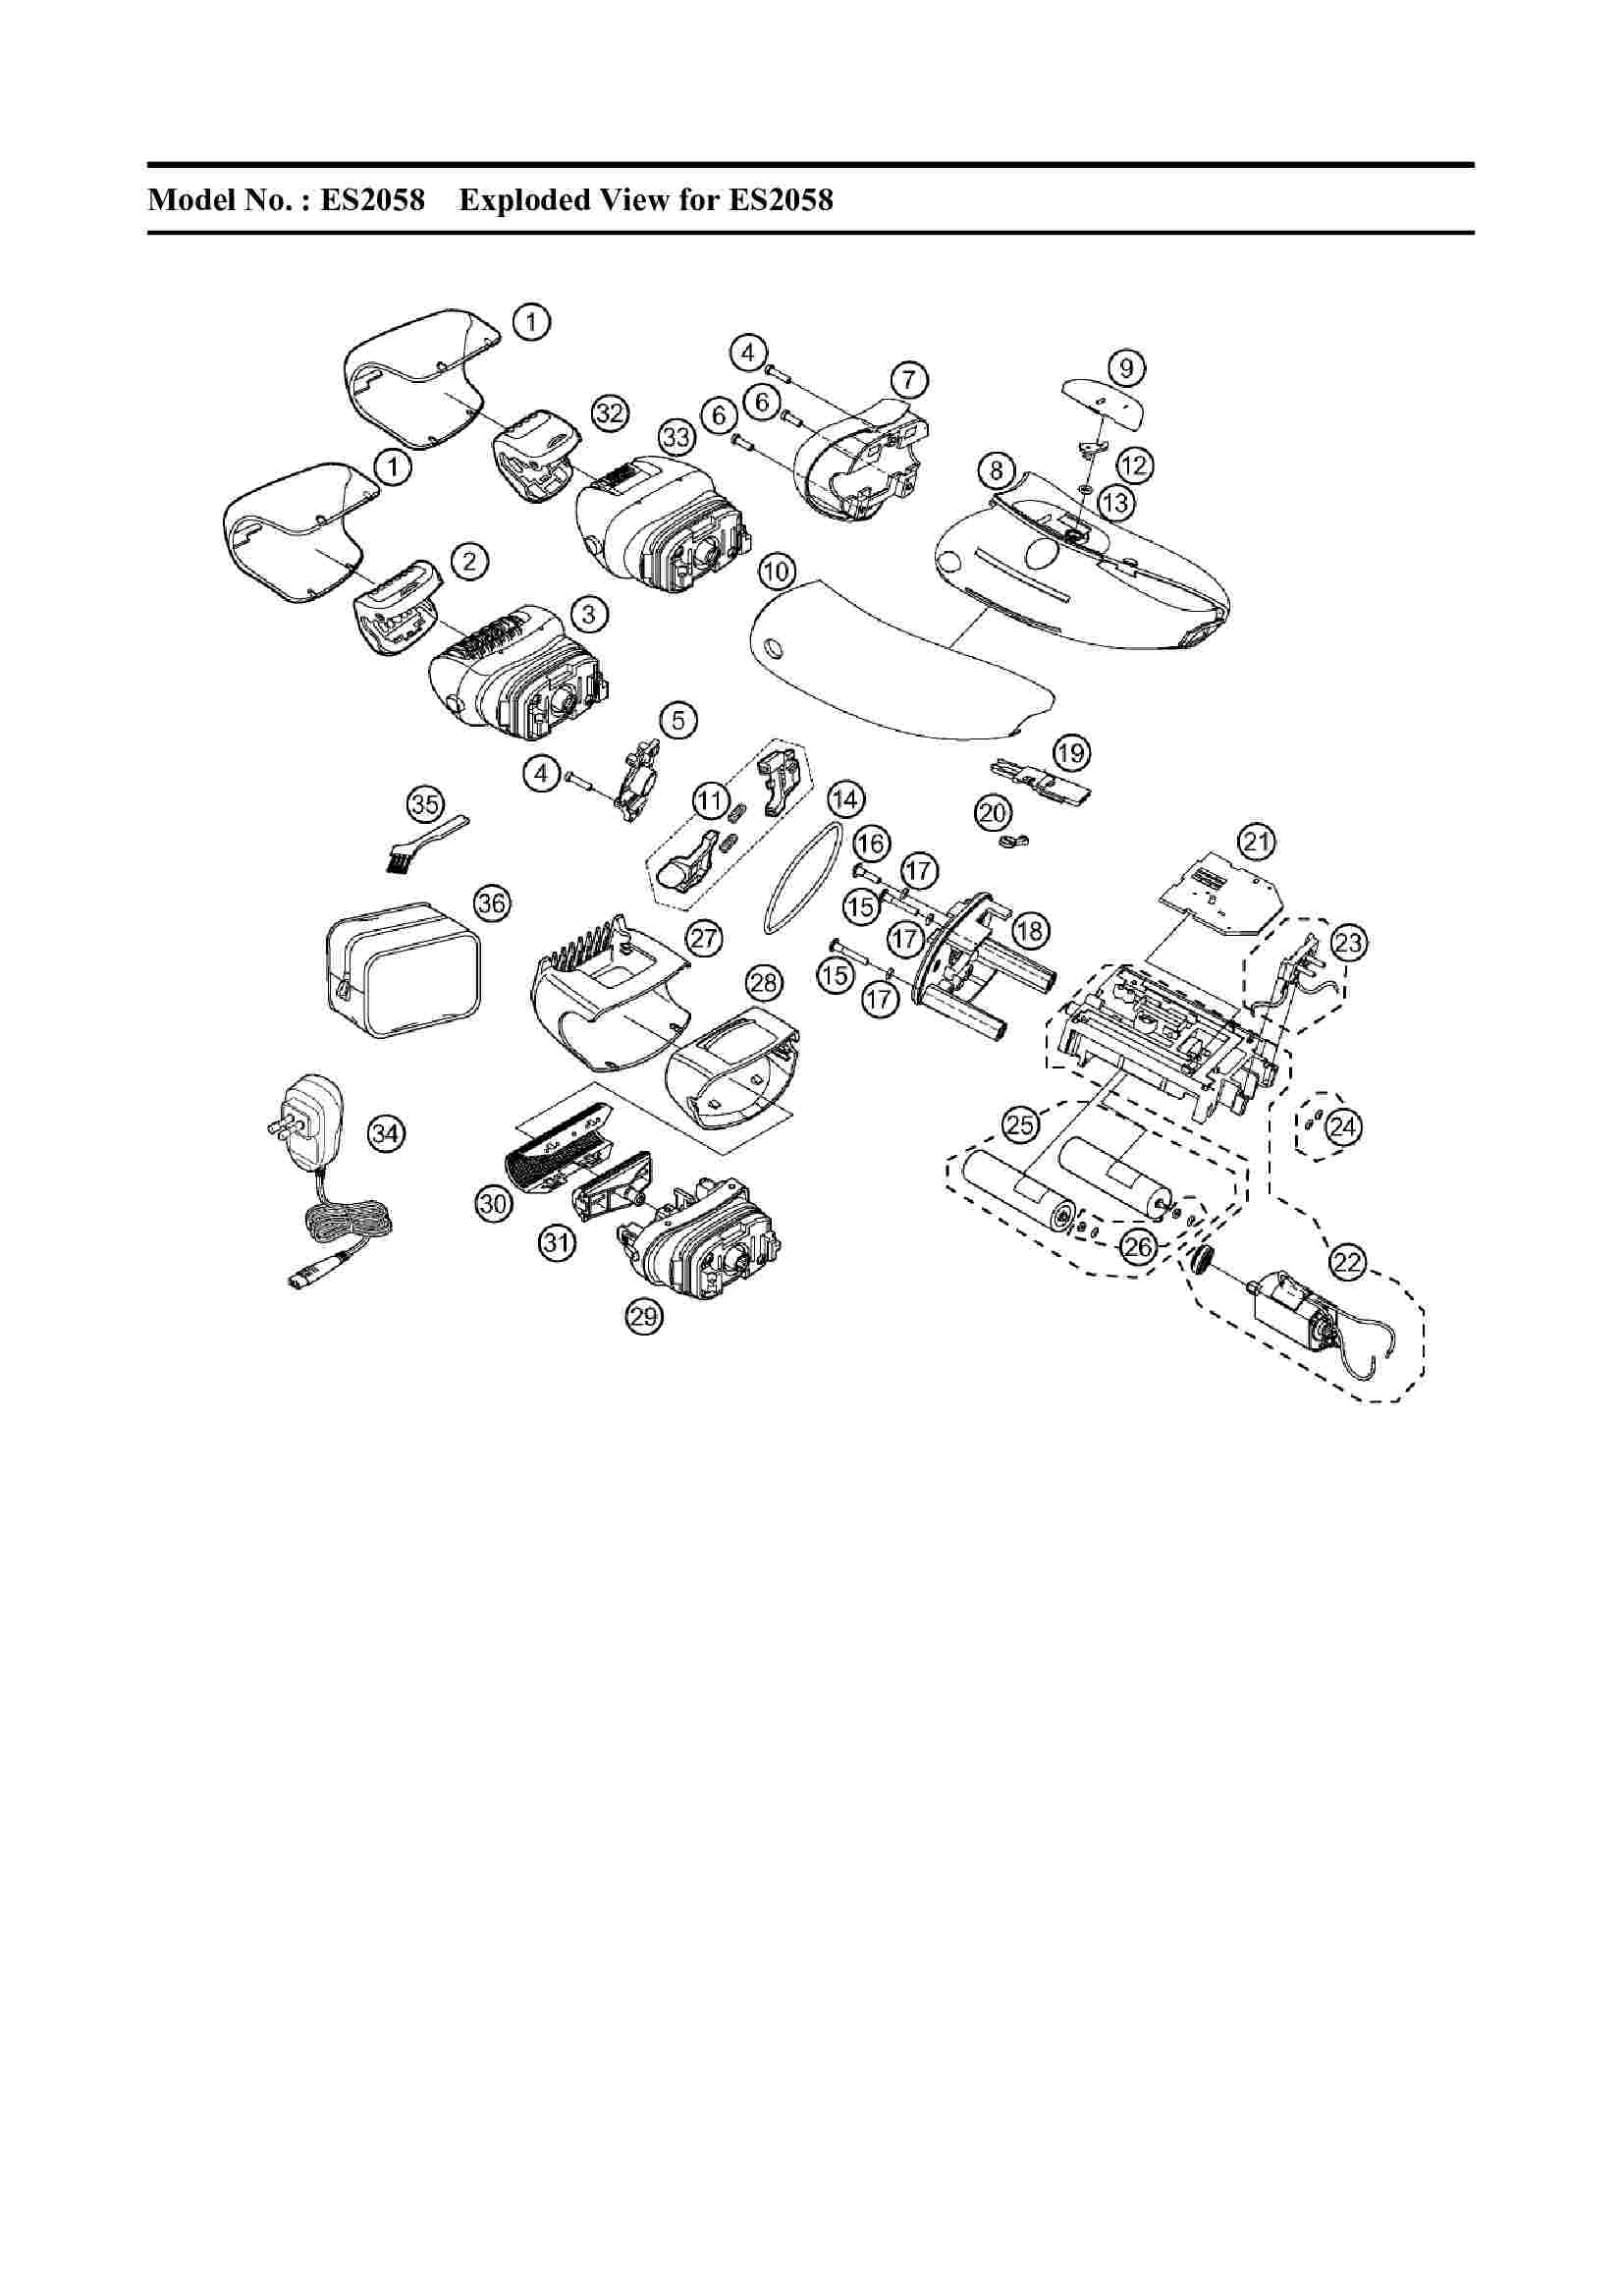 ES-2058: Exploded View